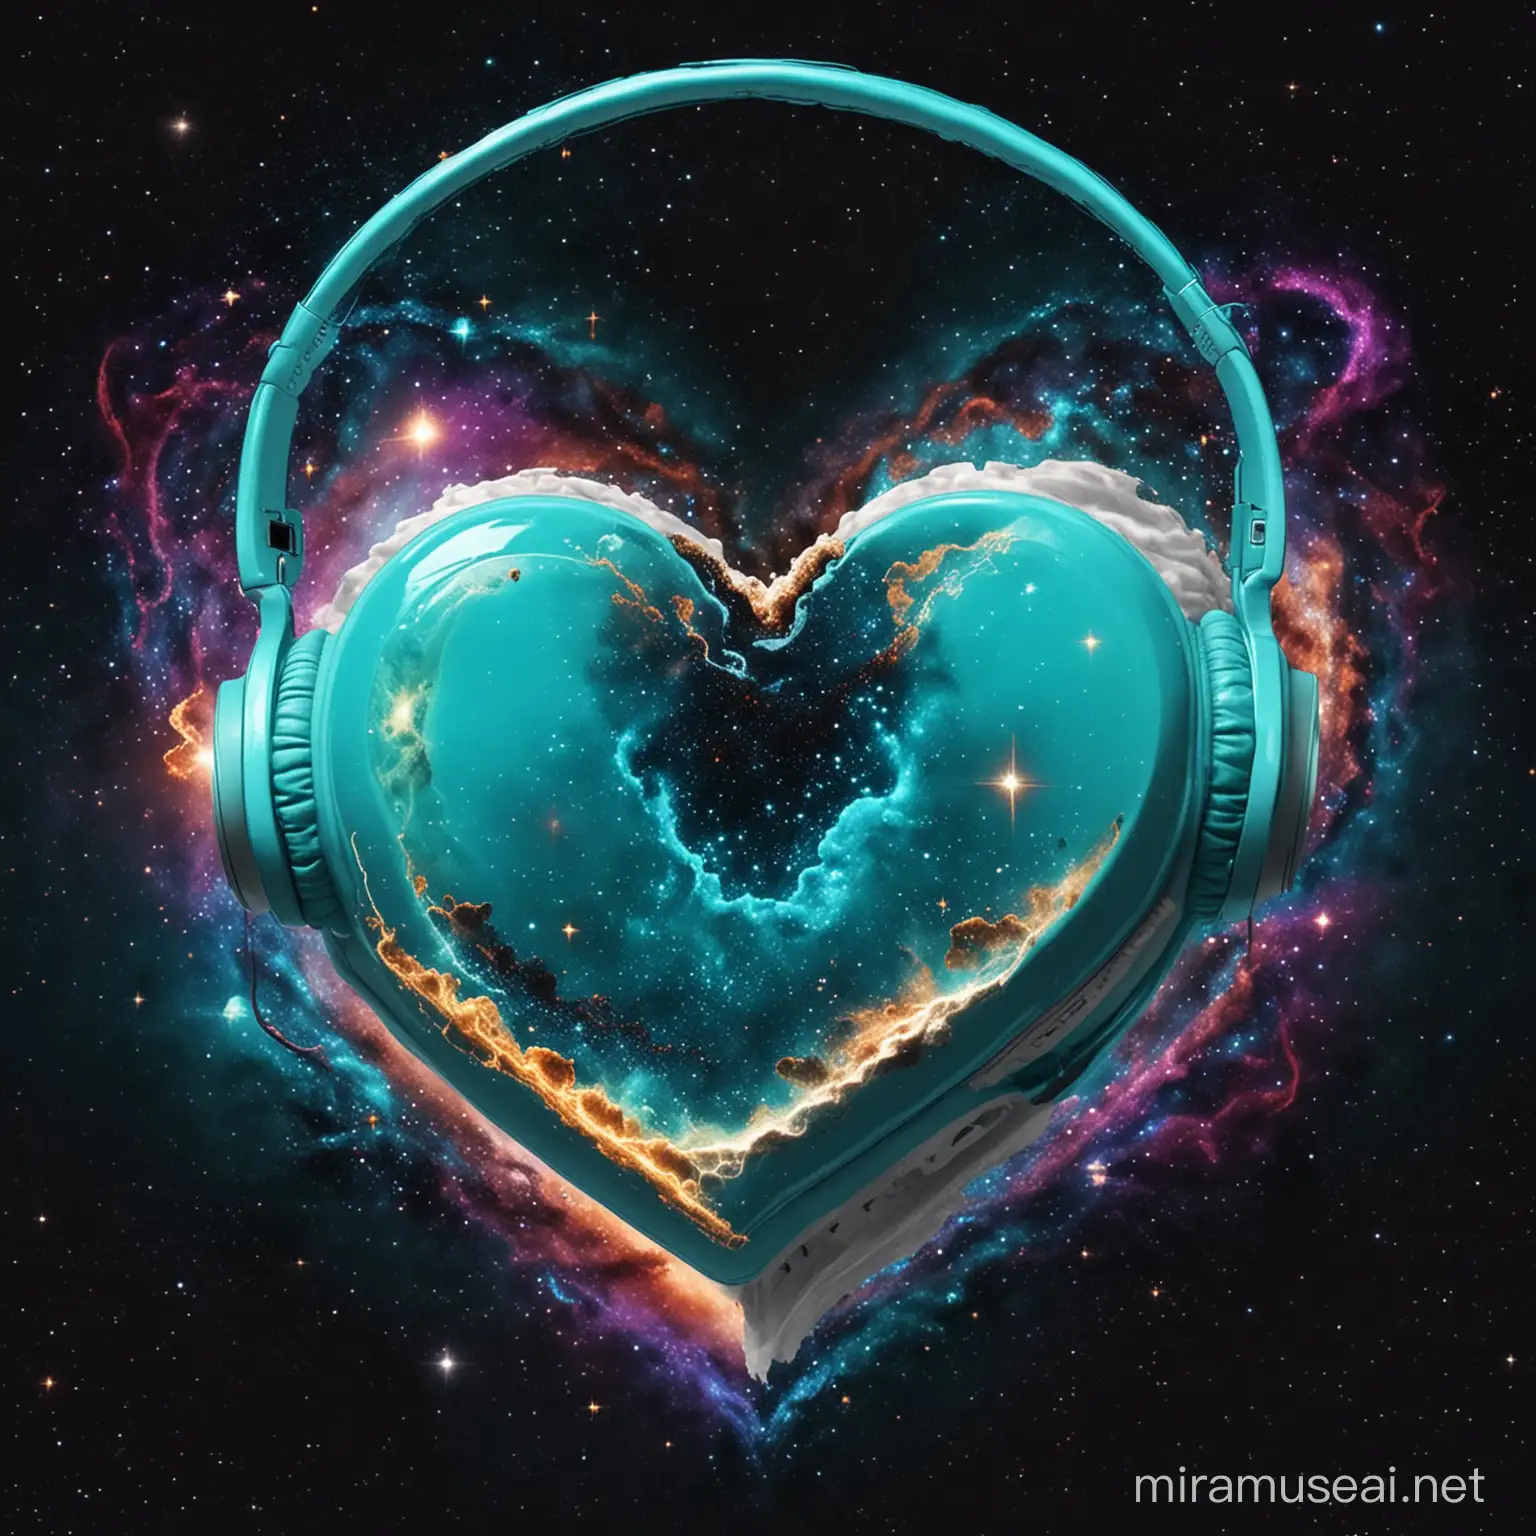 Bright Heart in Space with Turquoise Headphones